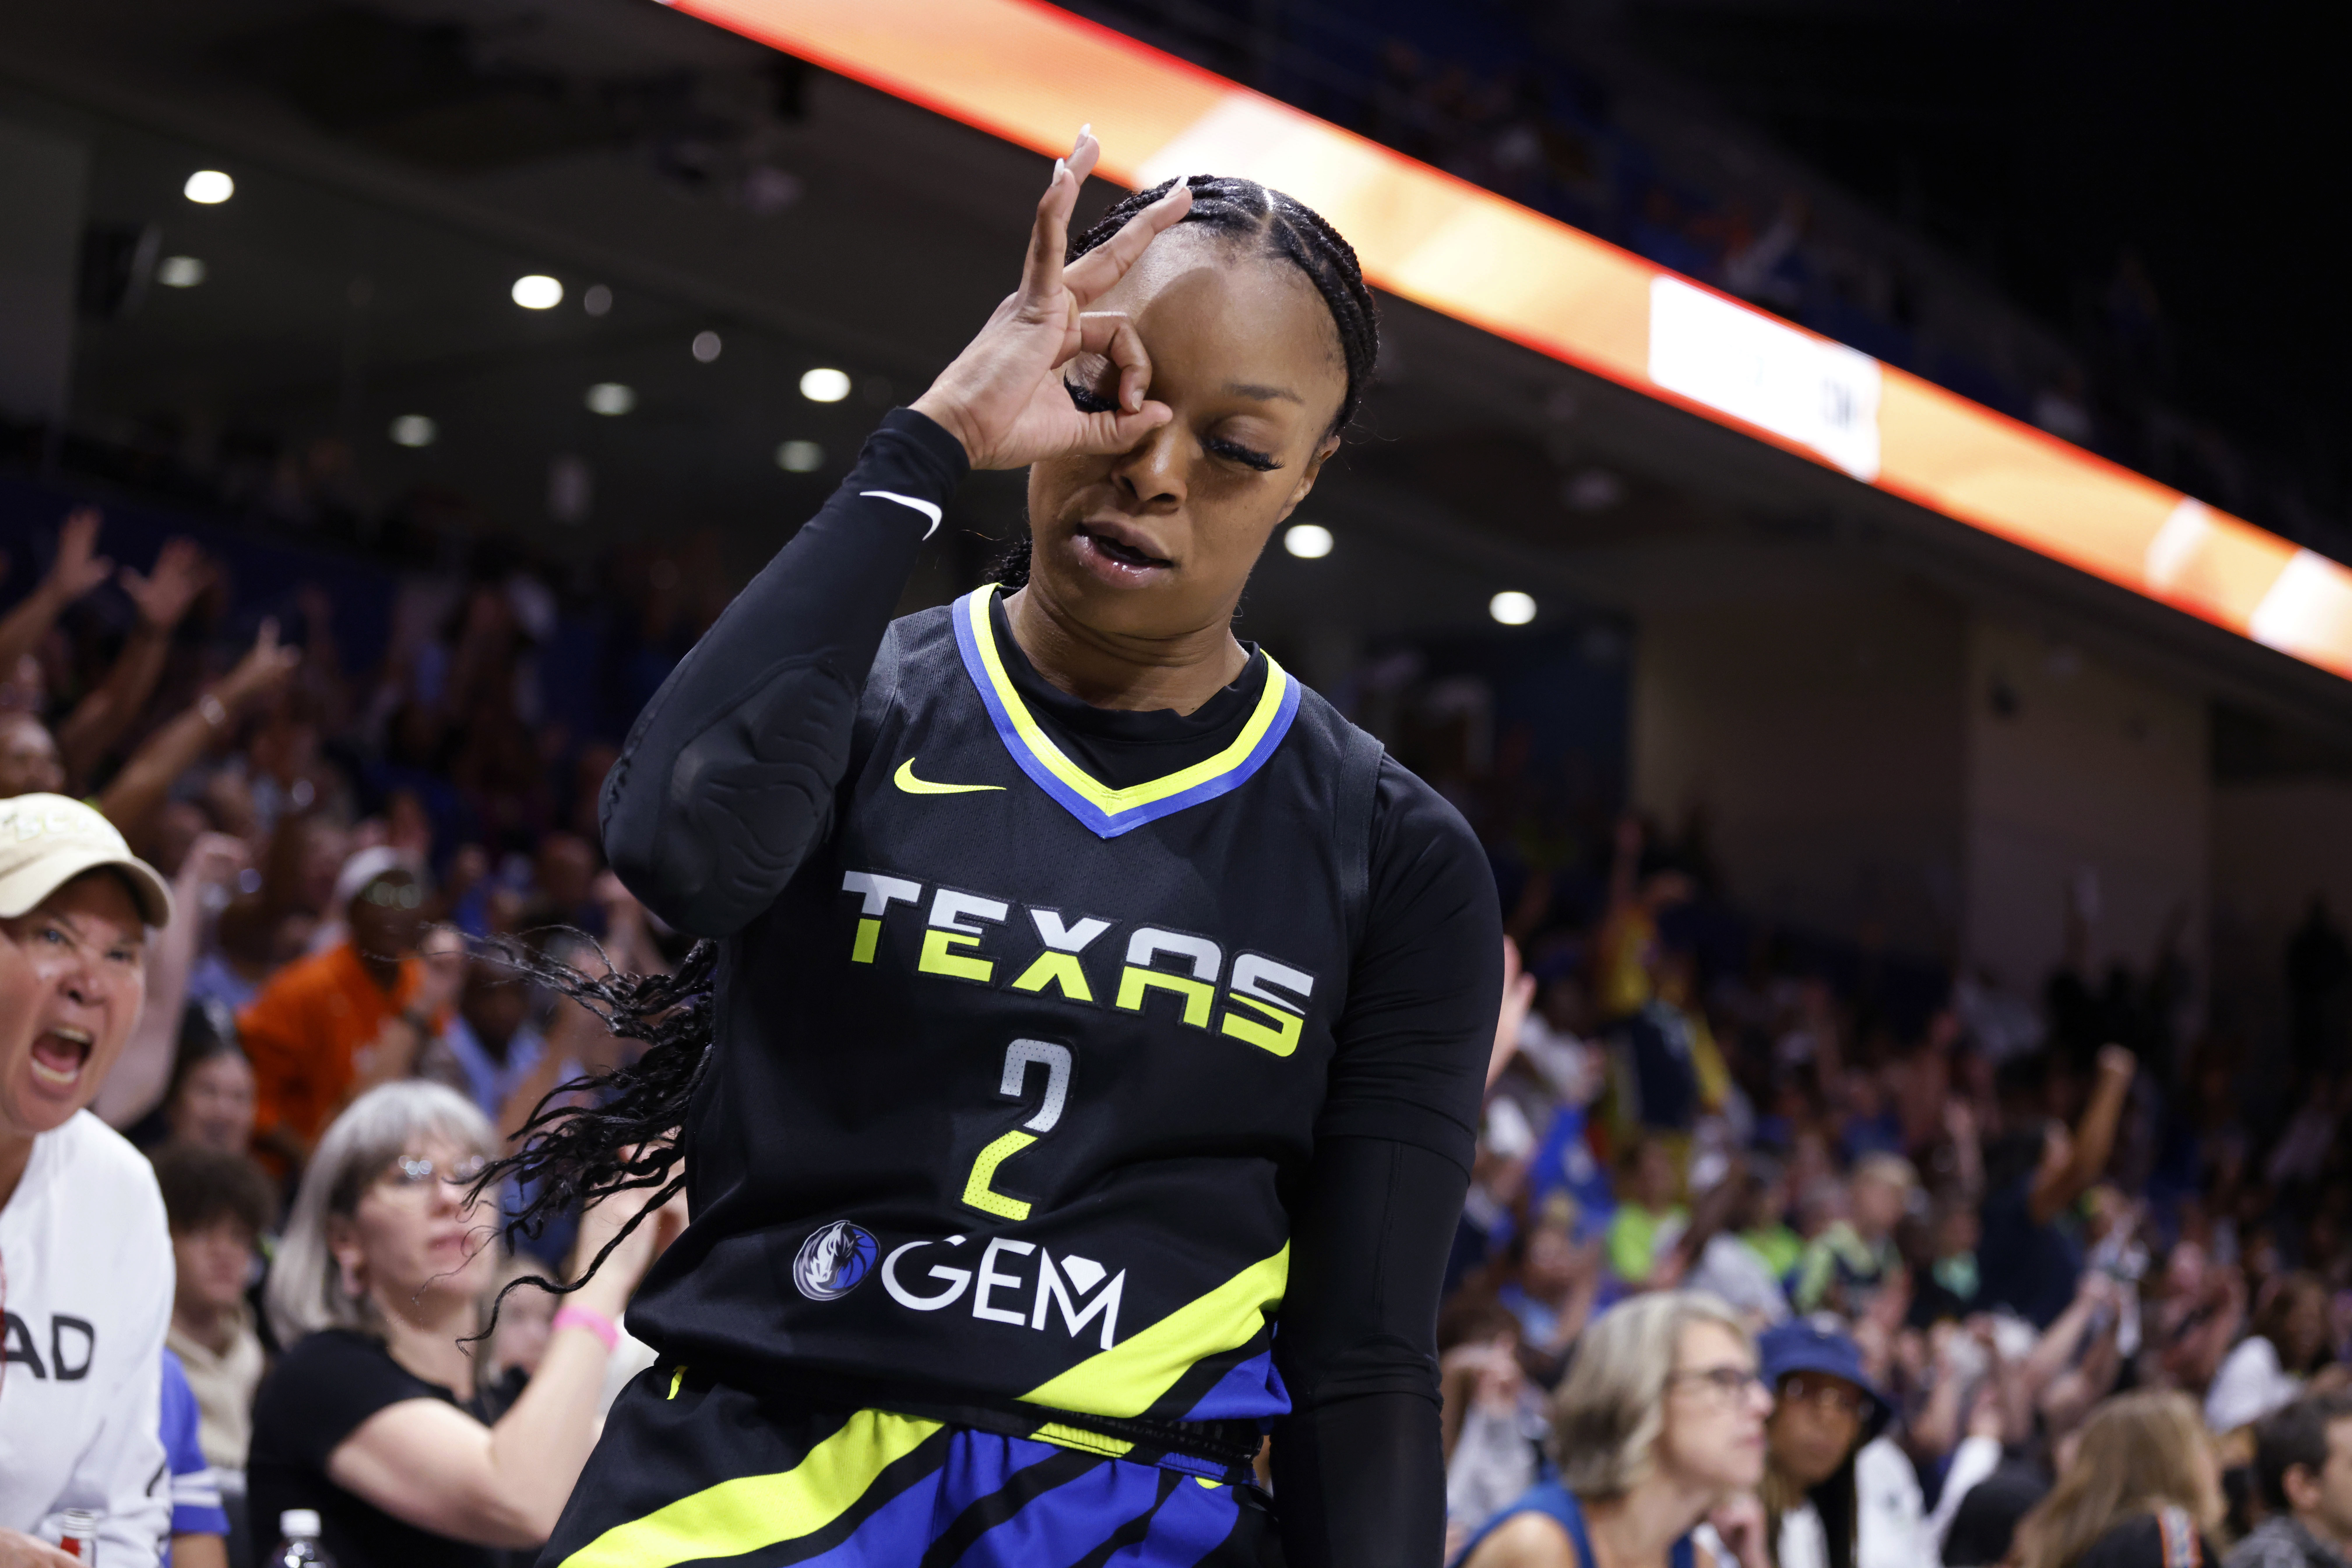 WNBA Moments to Debut on Top Shot